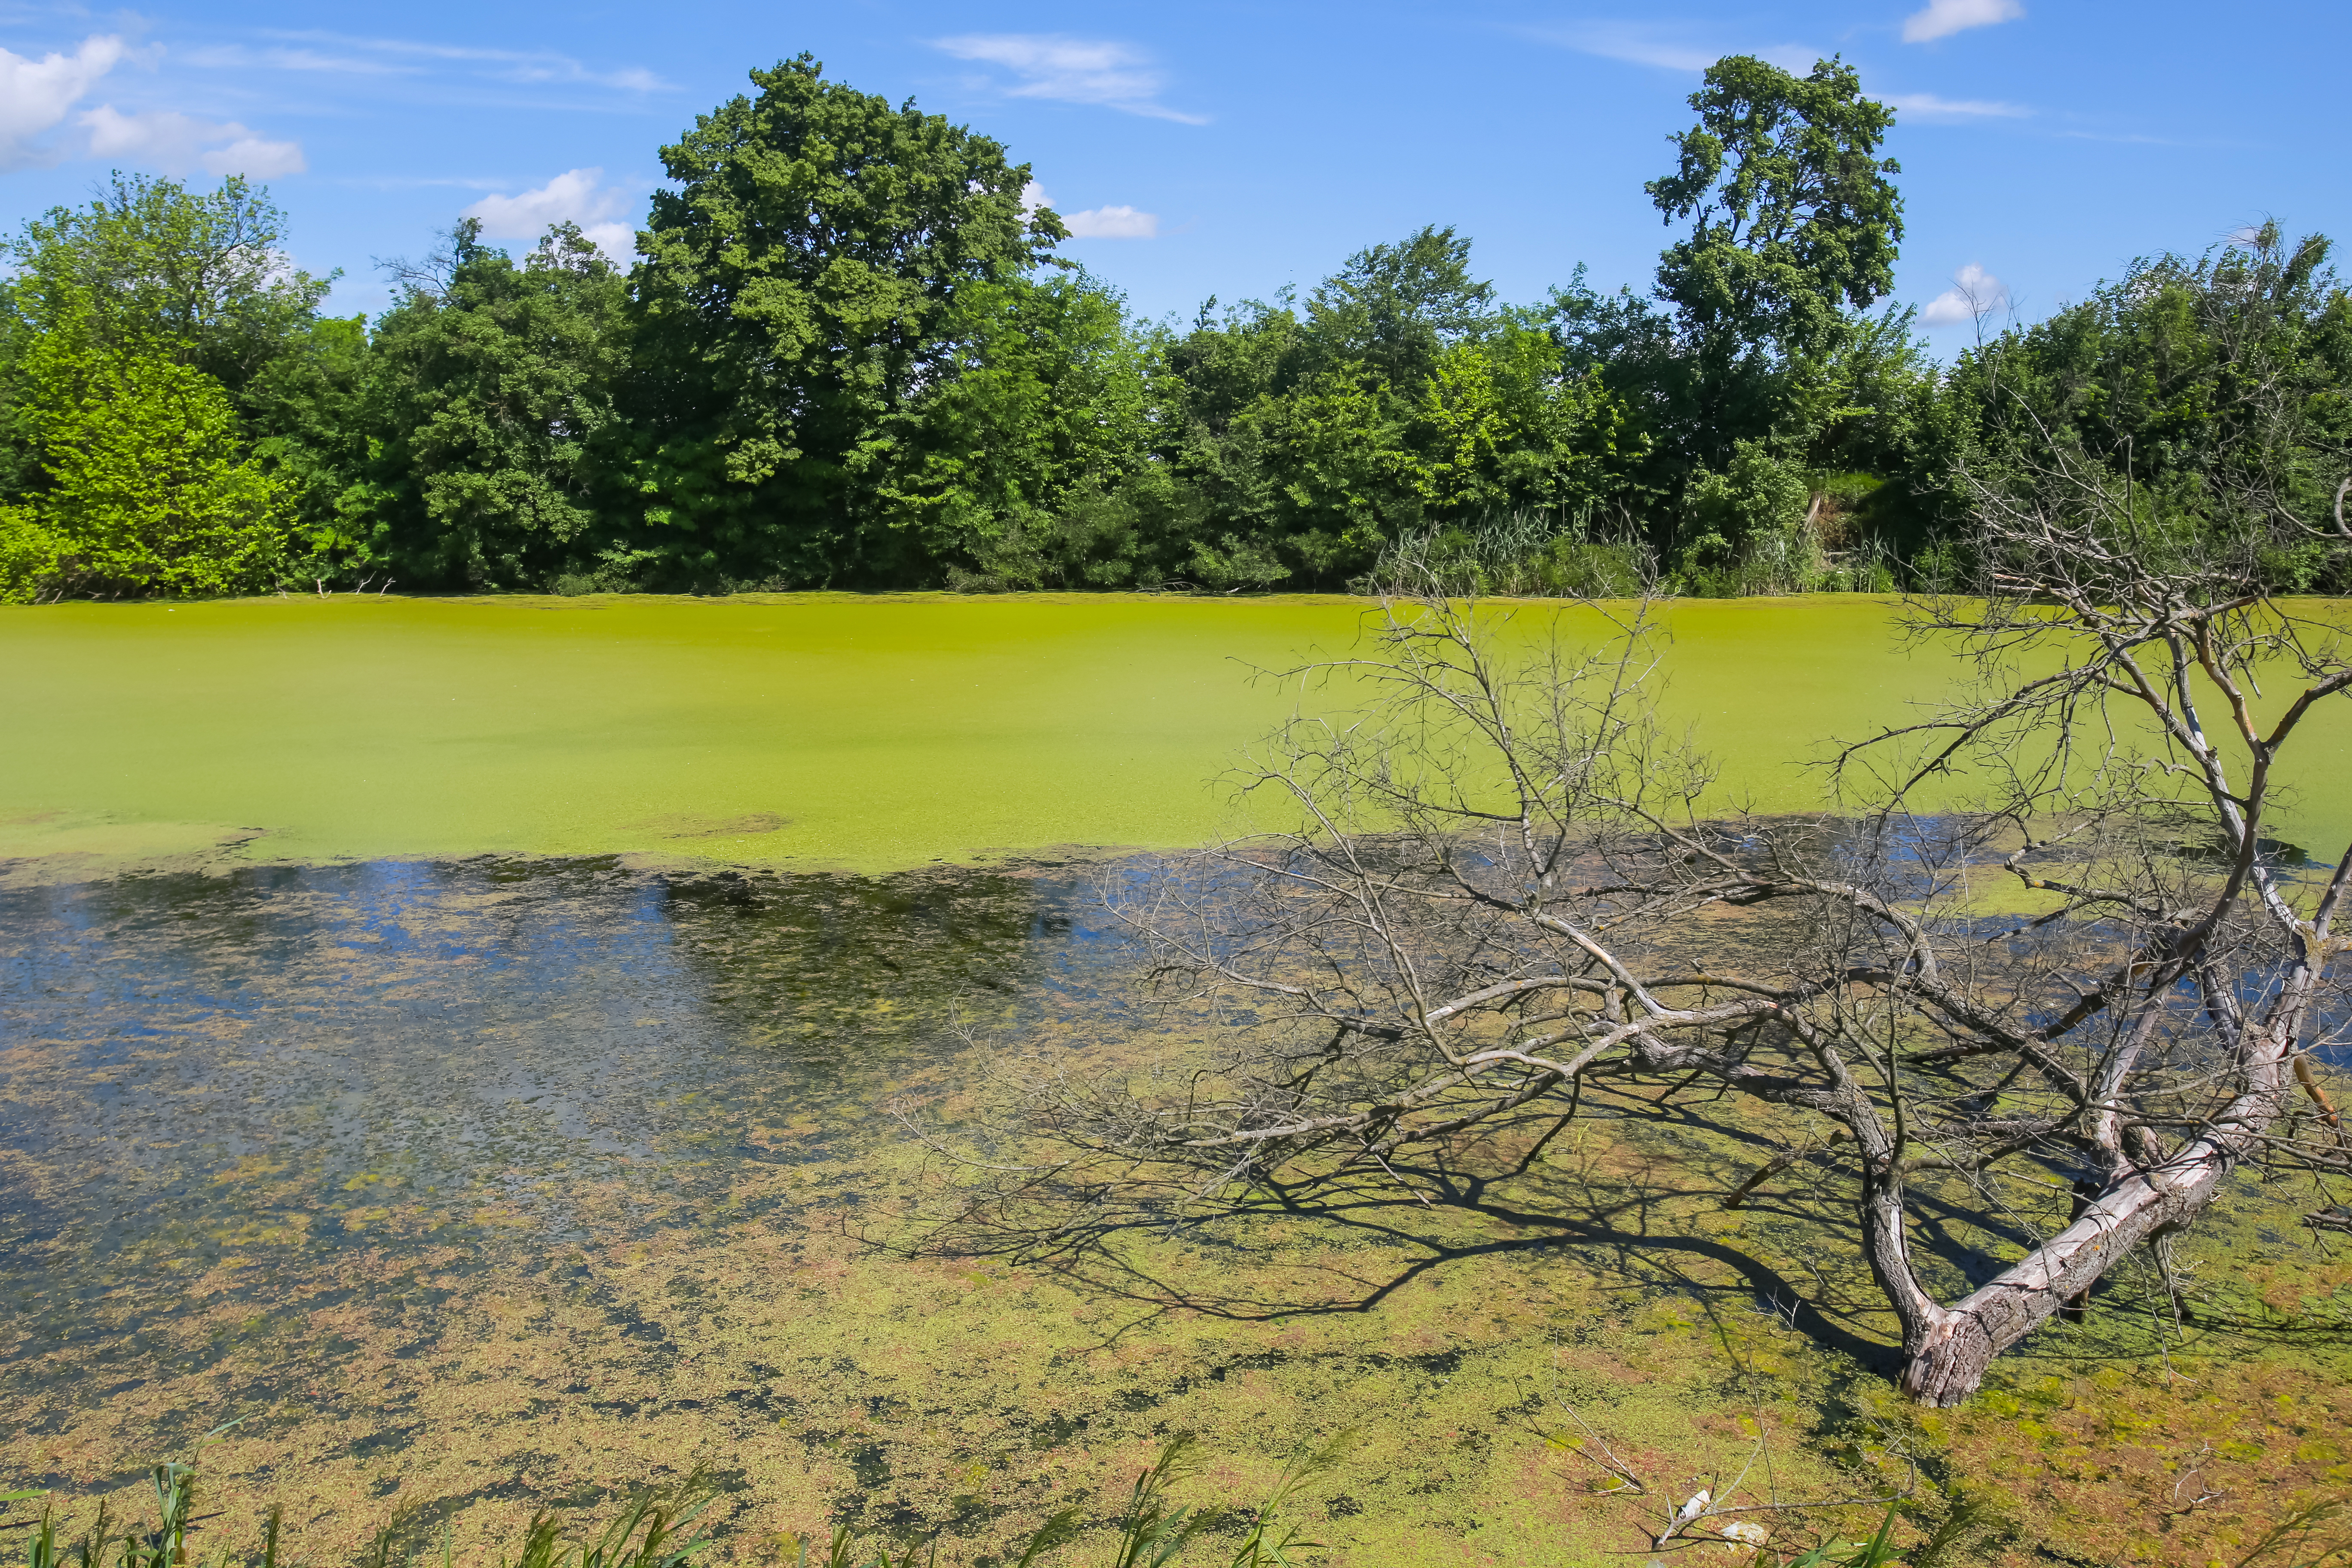 Algal blooms and eutrophication caused by drainage of phosphorous and nitrogen contaminated water from farms